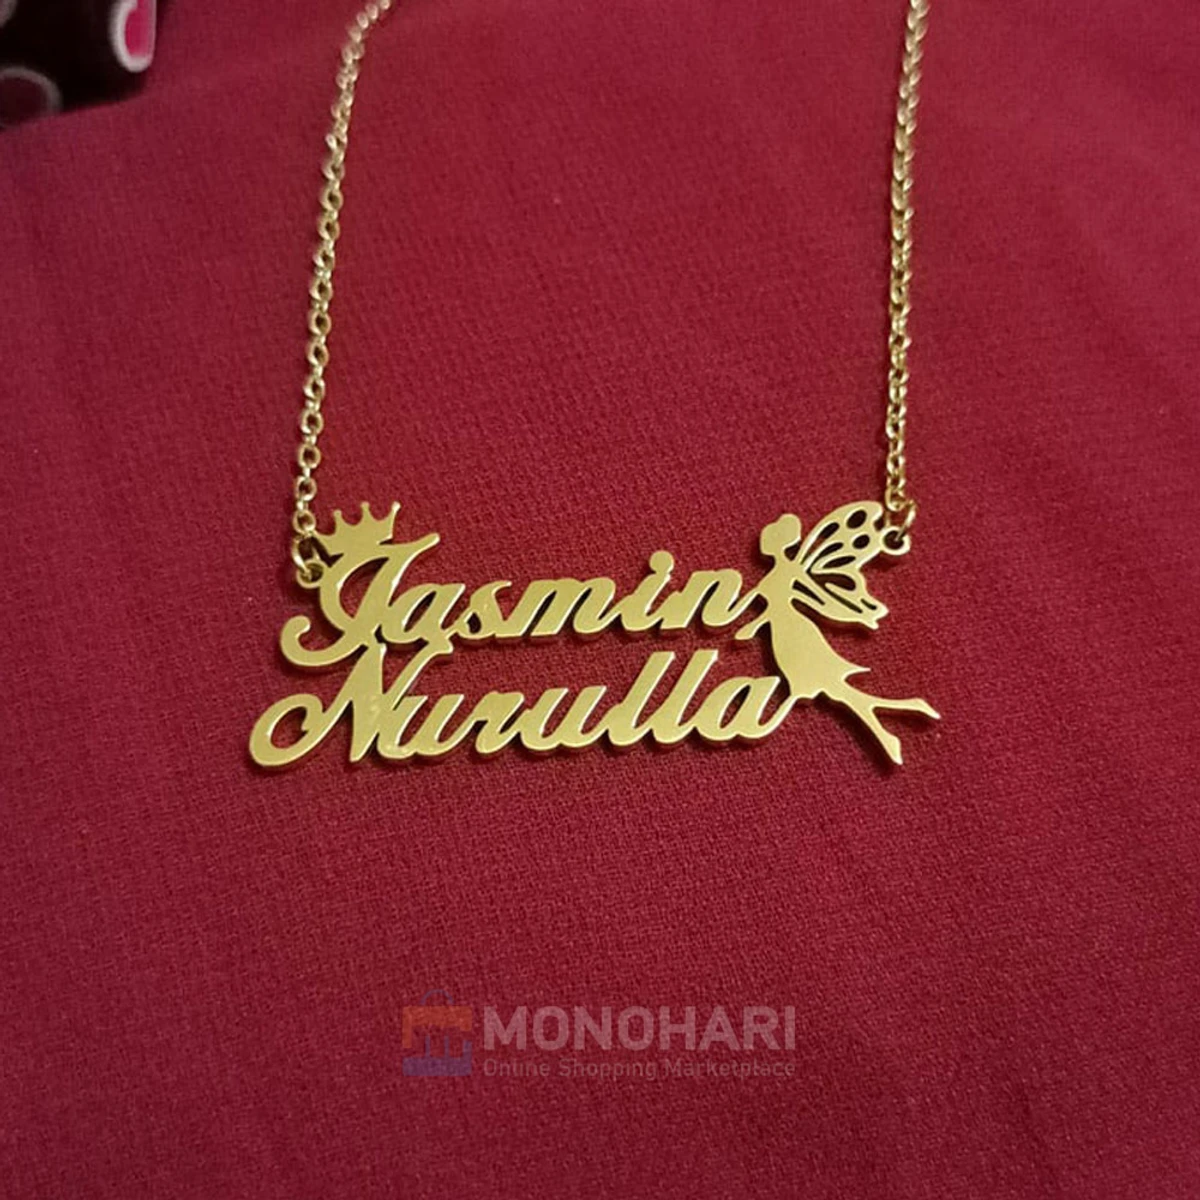 Couple Name Necklace (Iasmin & Nurullah) With Left Side Angel Shape 22K Gold Plated Customized Necklace